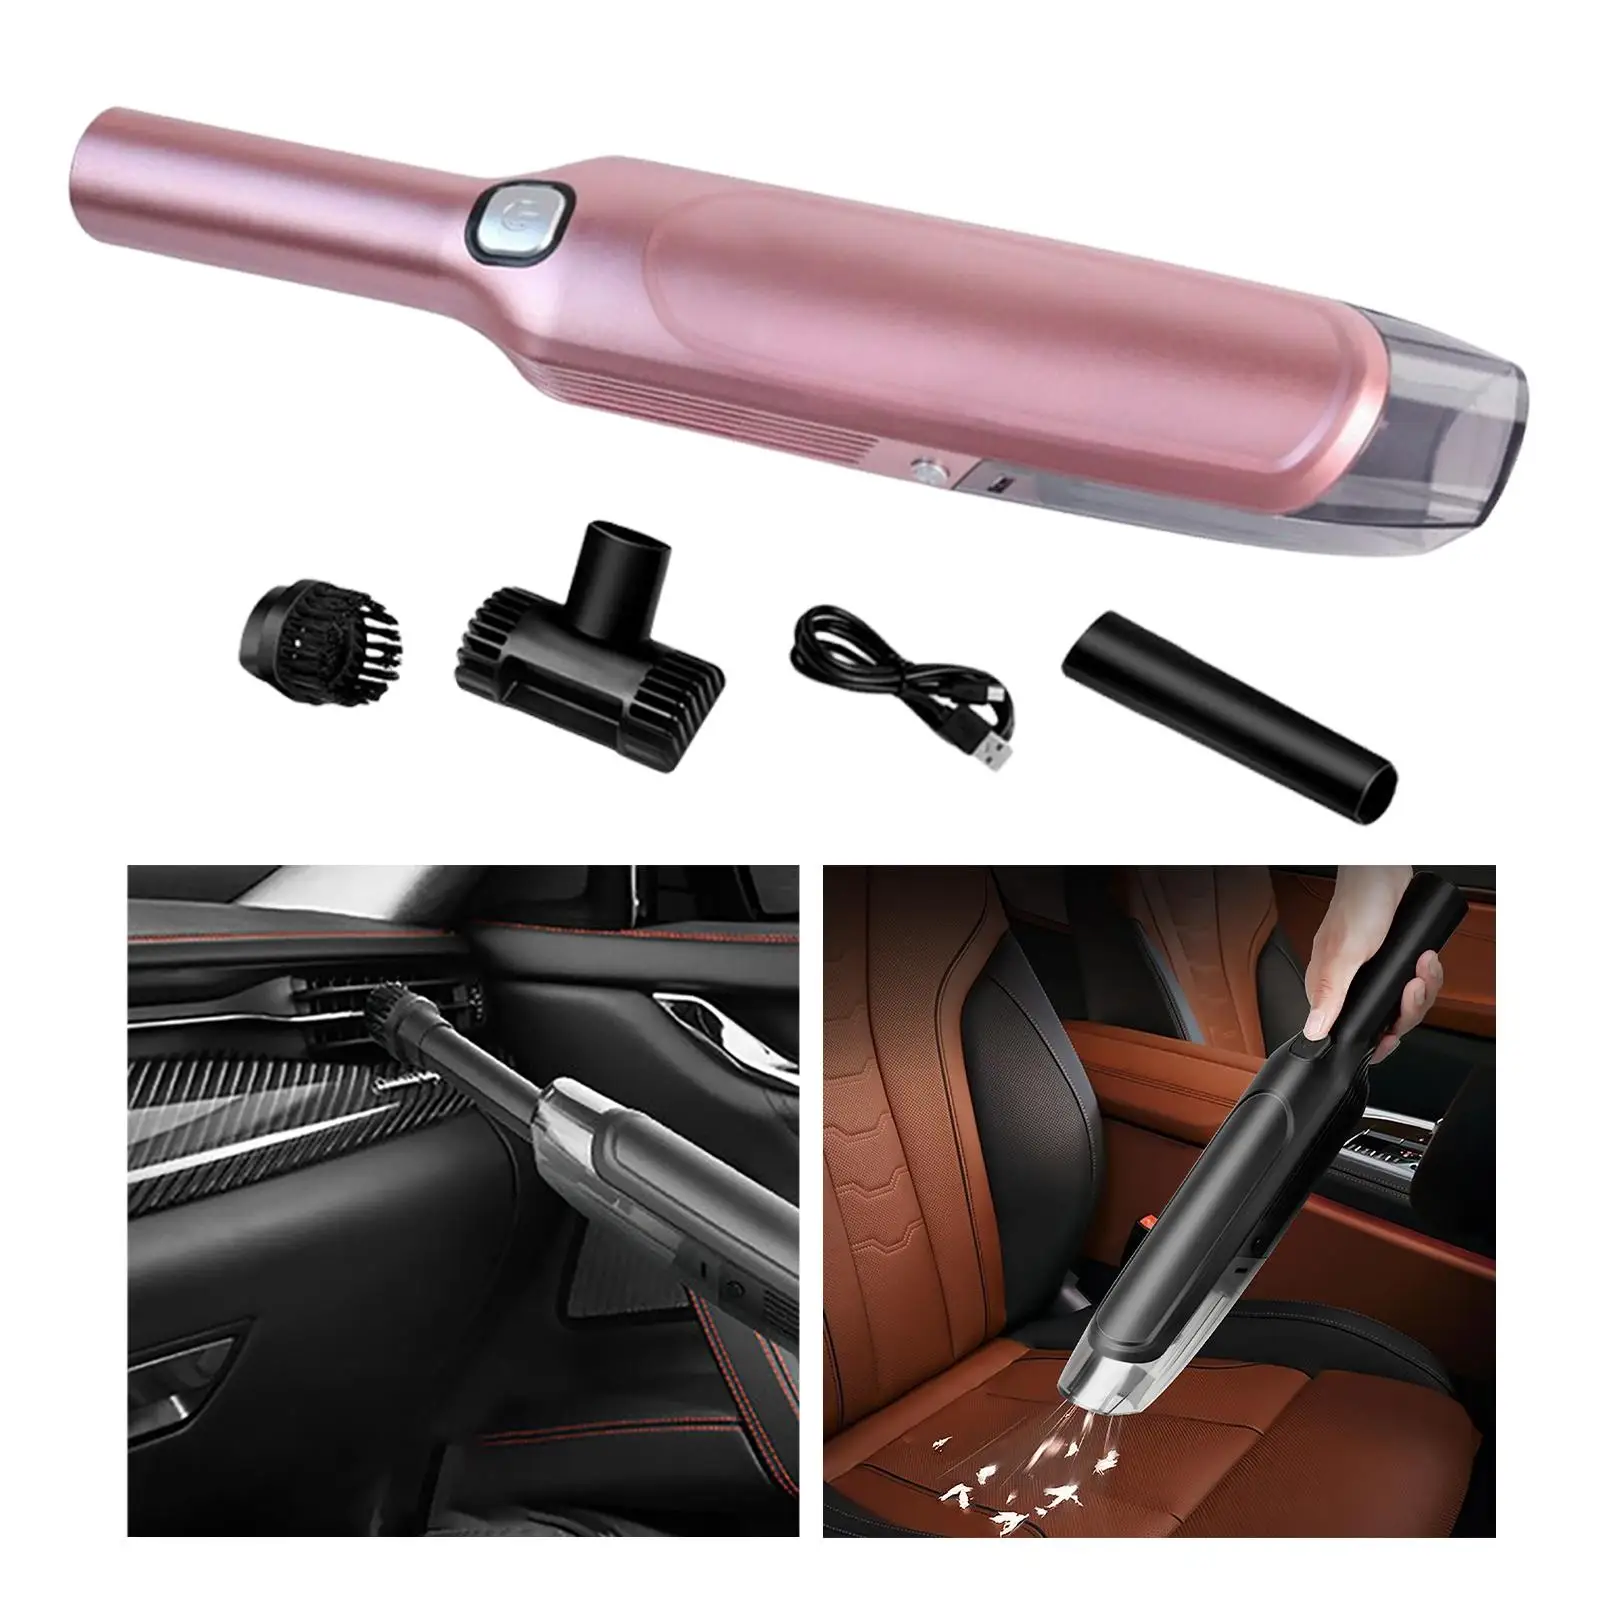 Cordless Car Vacuum Cleaner 8000PA Washable Small 120W Handheld Vacuum for Car Pet Hair Kitchen Appliance Fast Charge